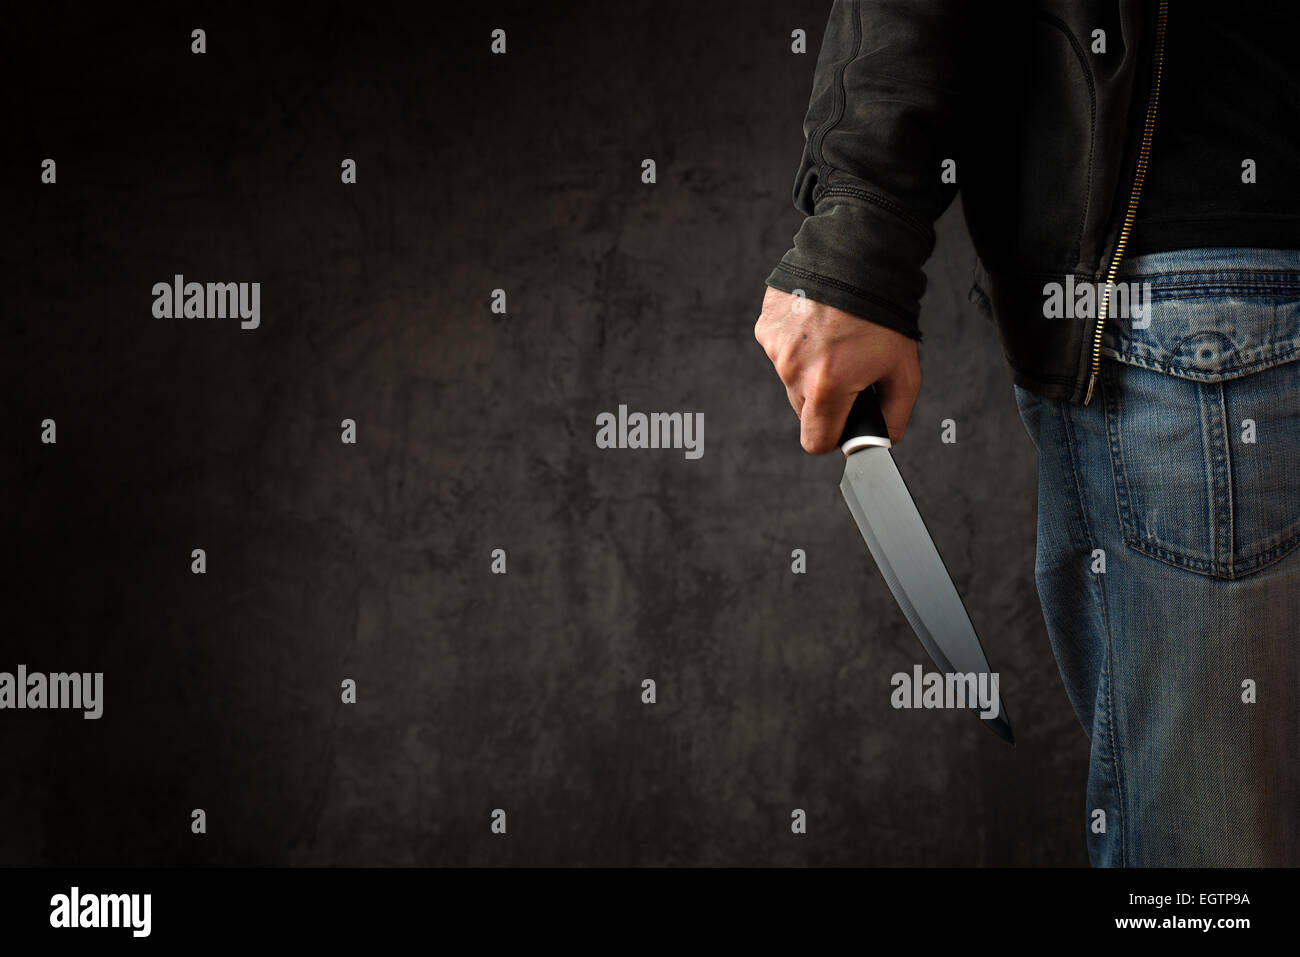 Evil criminal with large sharp knife ready for robbery or to commit a homicide Stock Photo